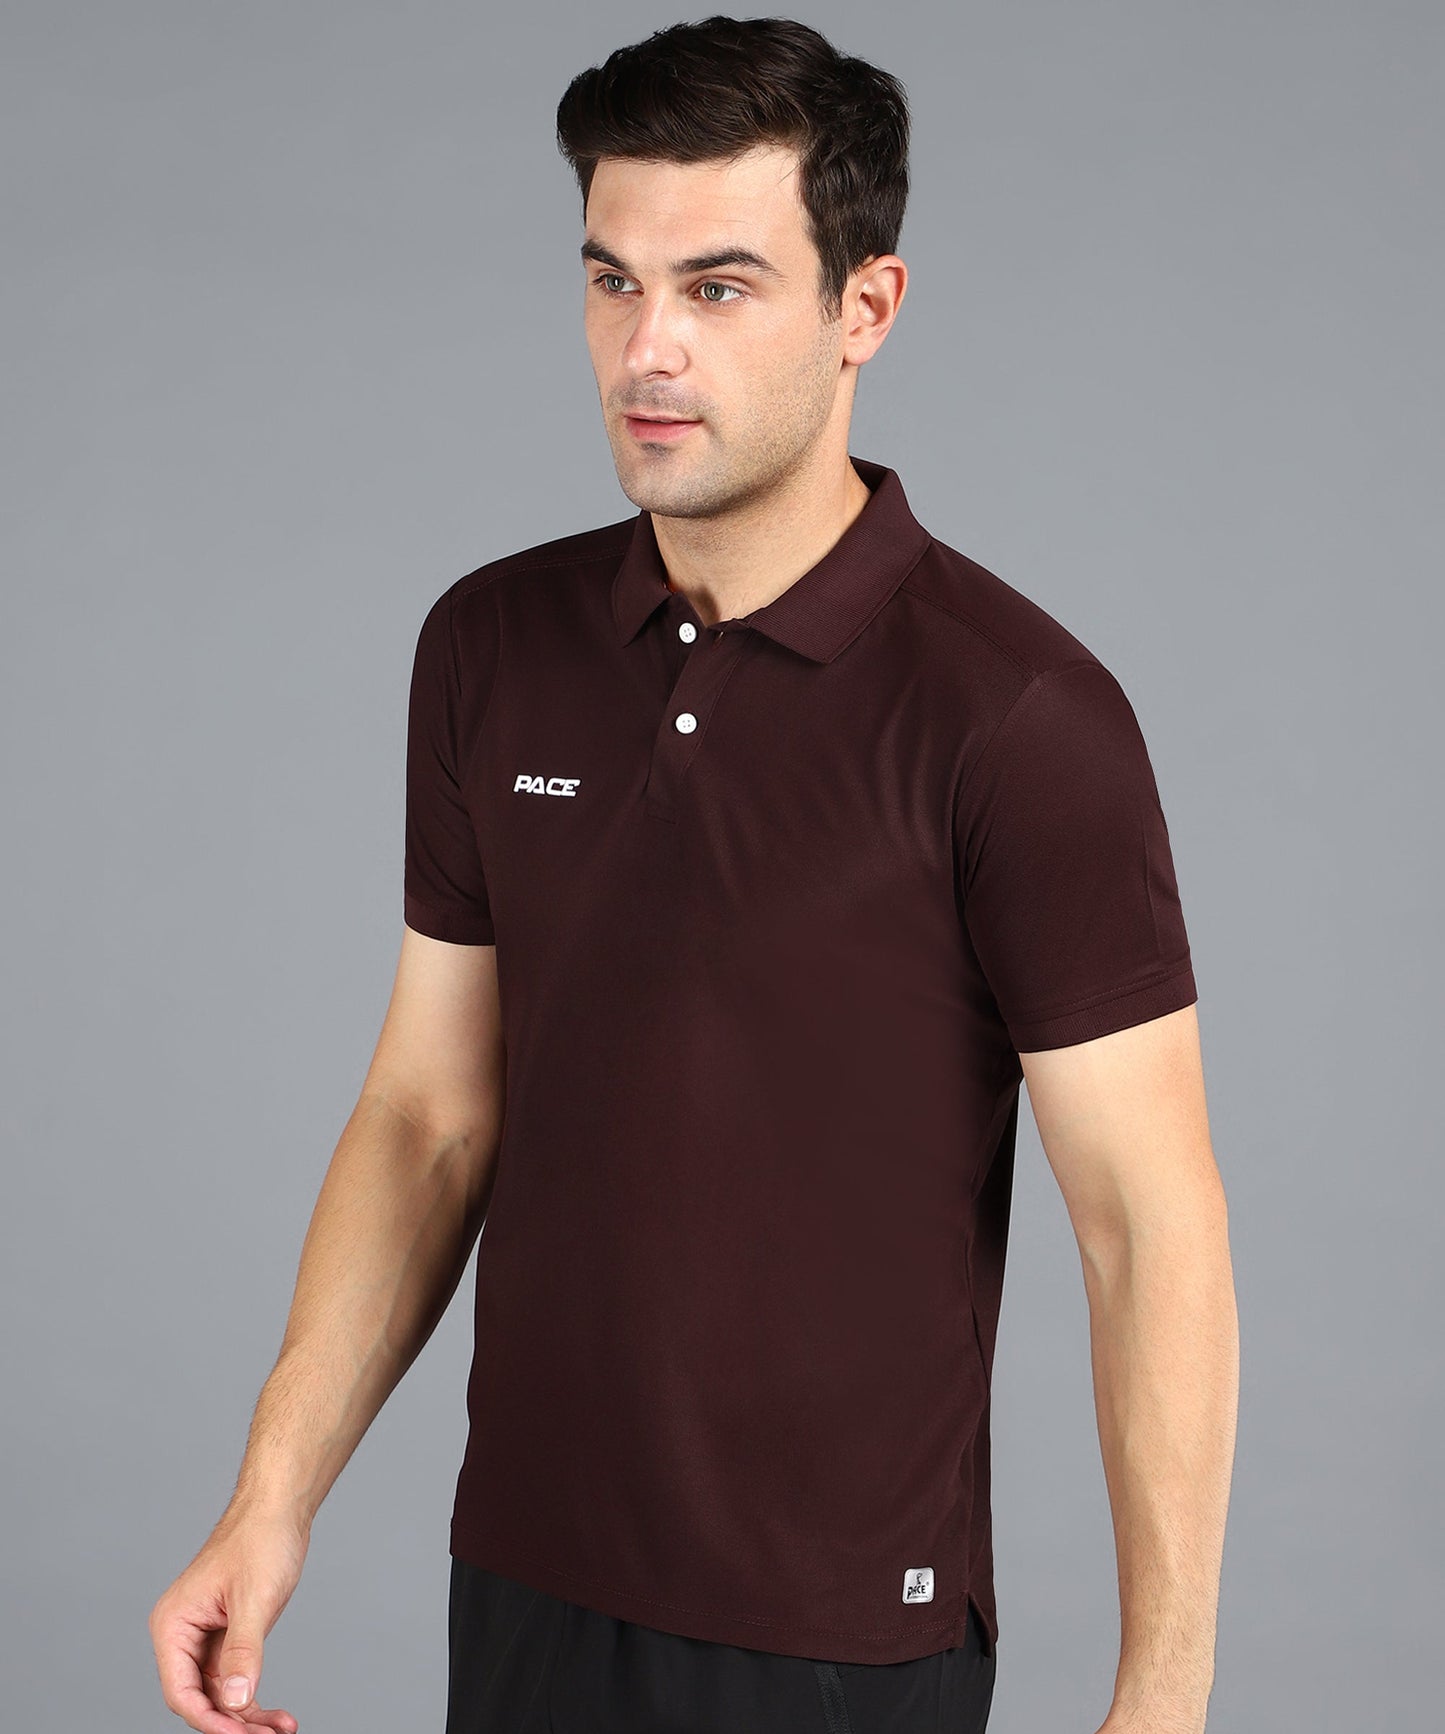 Pace International Jazz Polo For Men